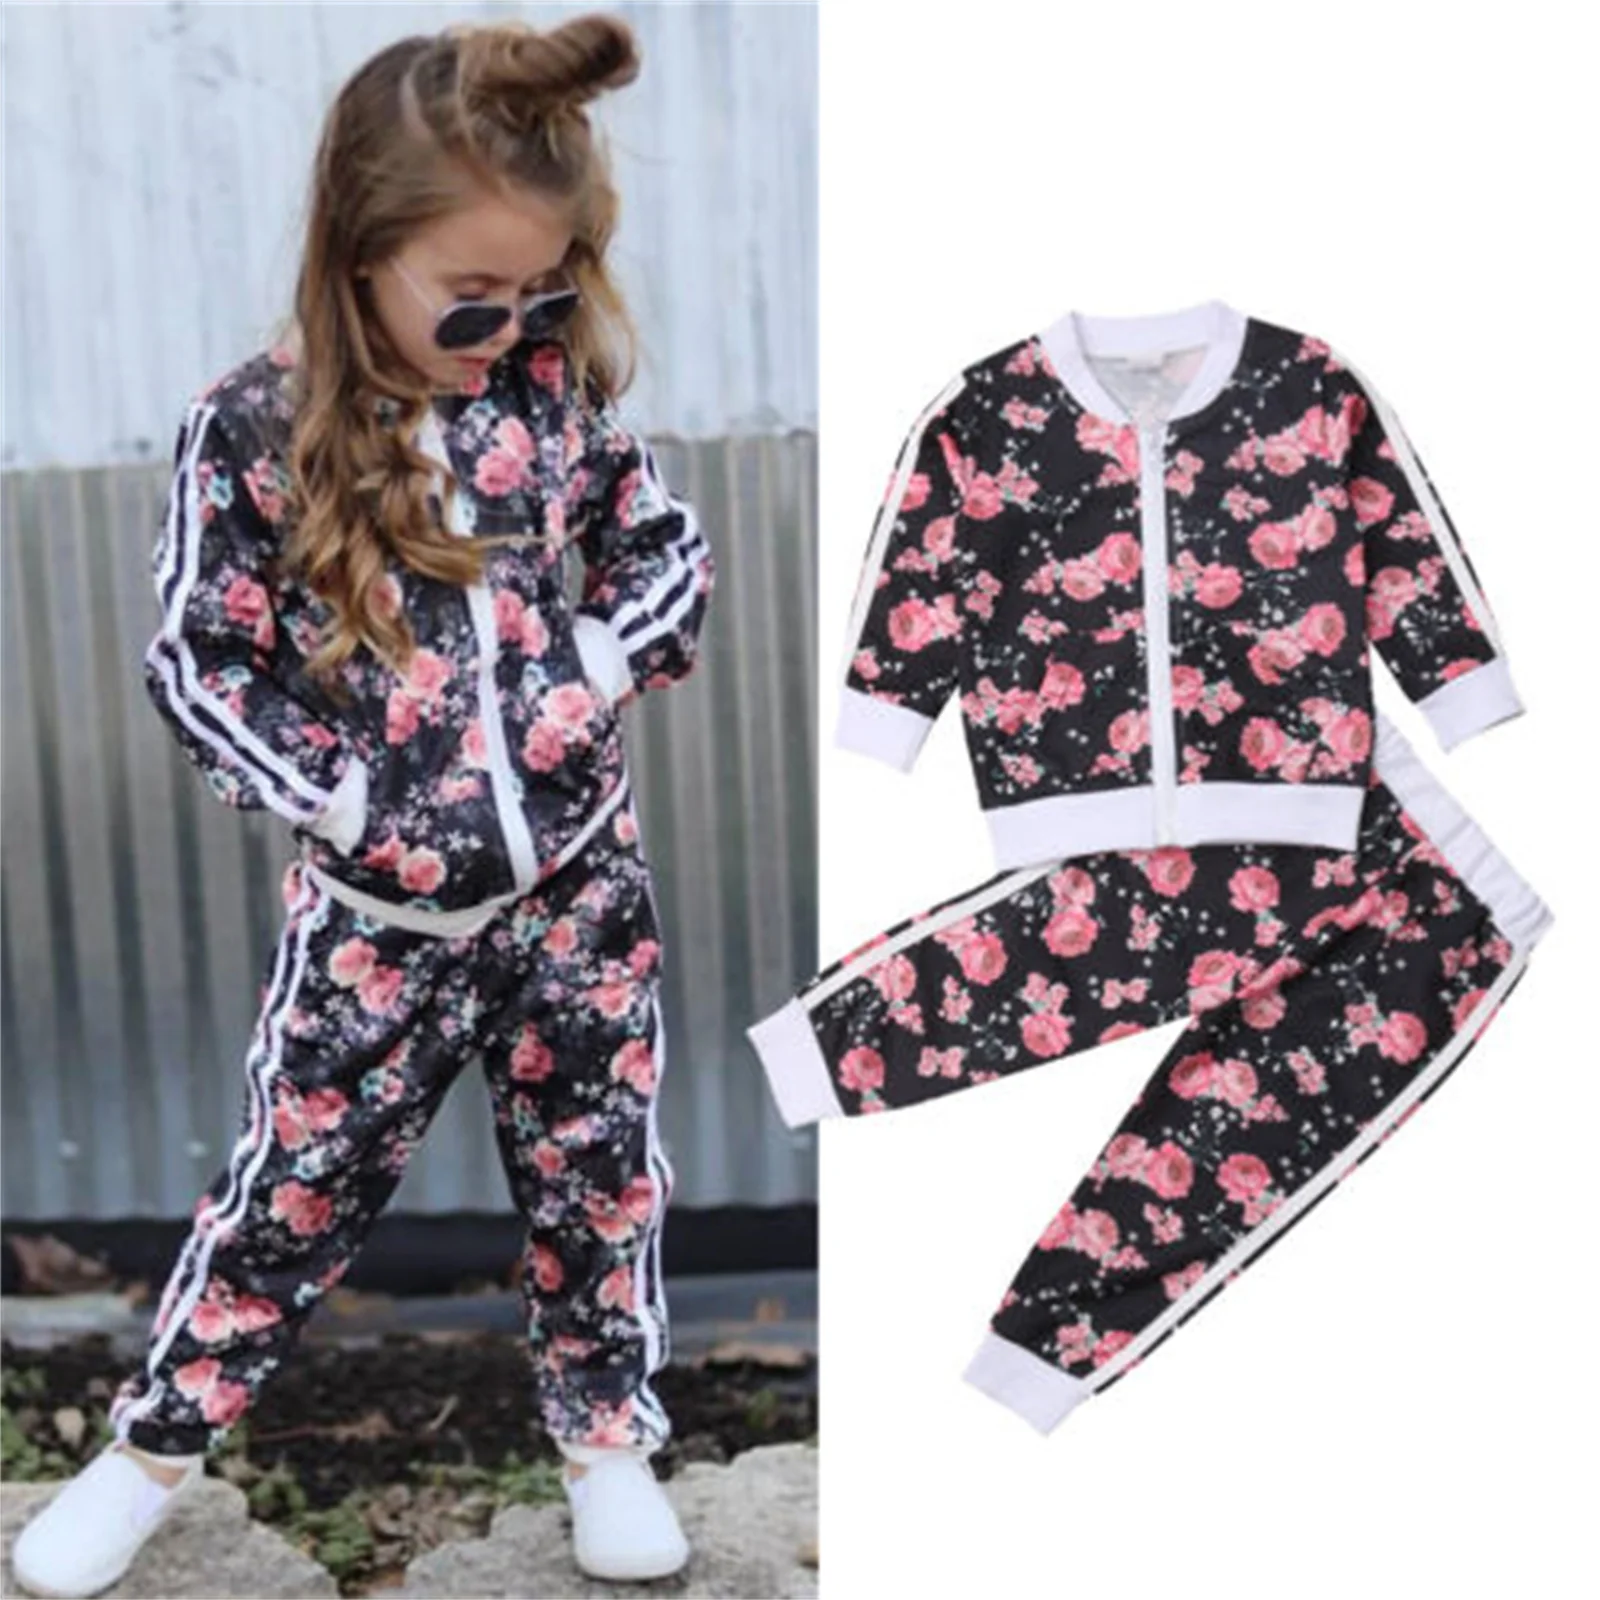 

Autumn Spring Kids Baby Casual Floral Print Clothes Set Toddler Girls Long Sleeve O-Neck Zip-Up Tops + Elastic Waist Long Pants